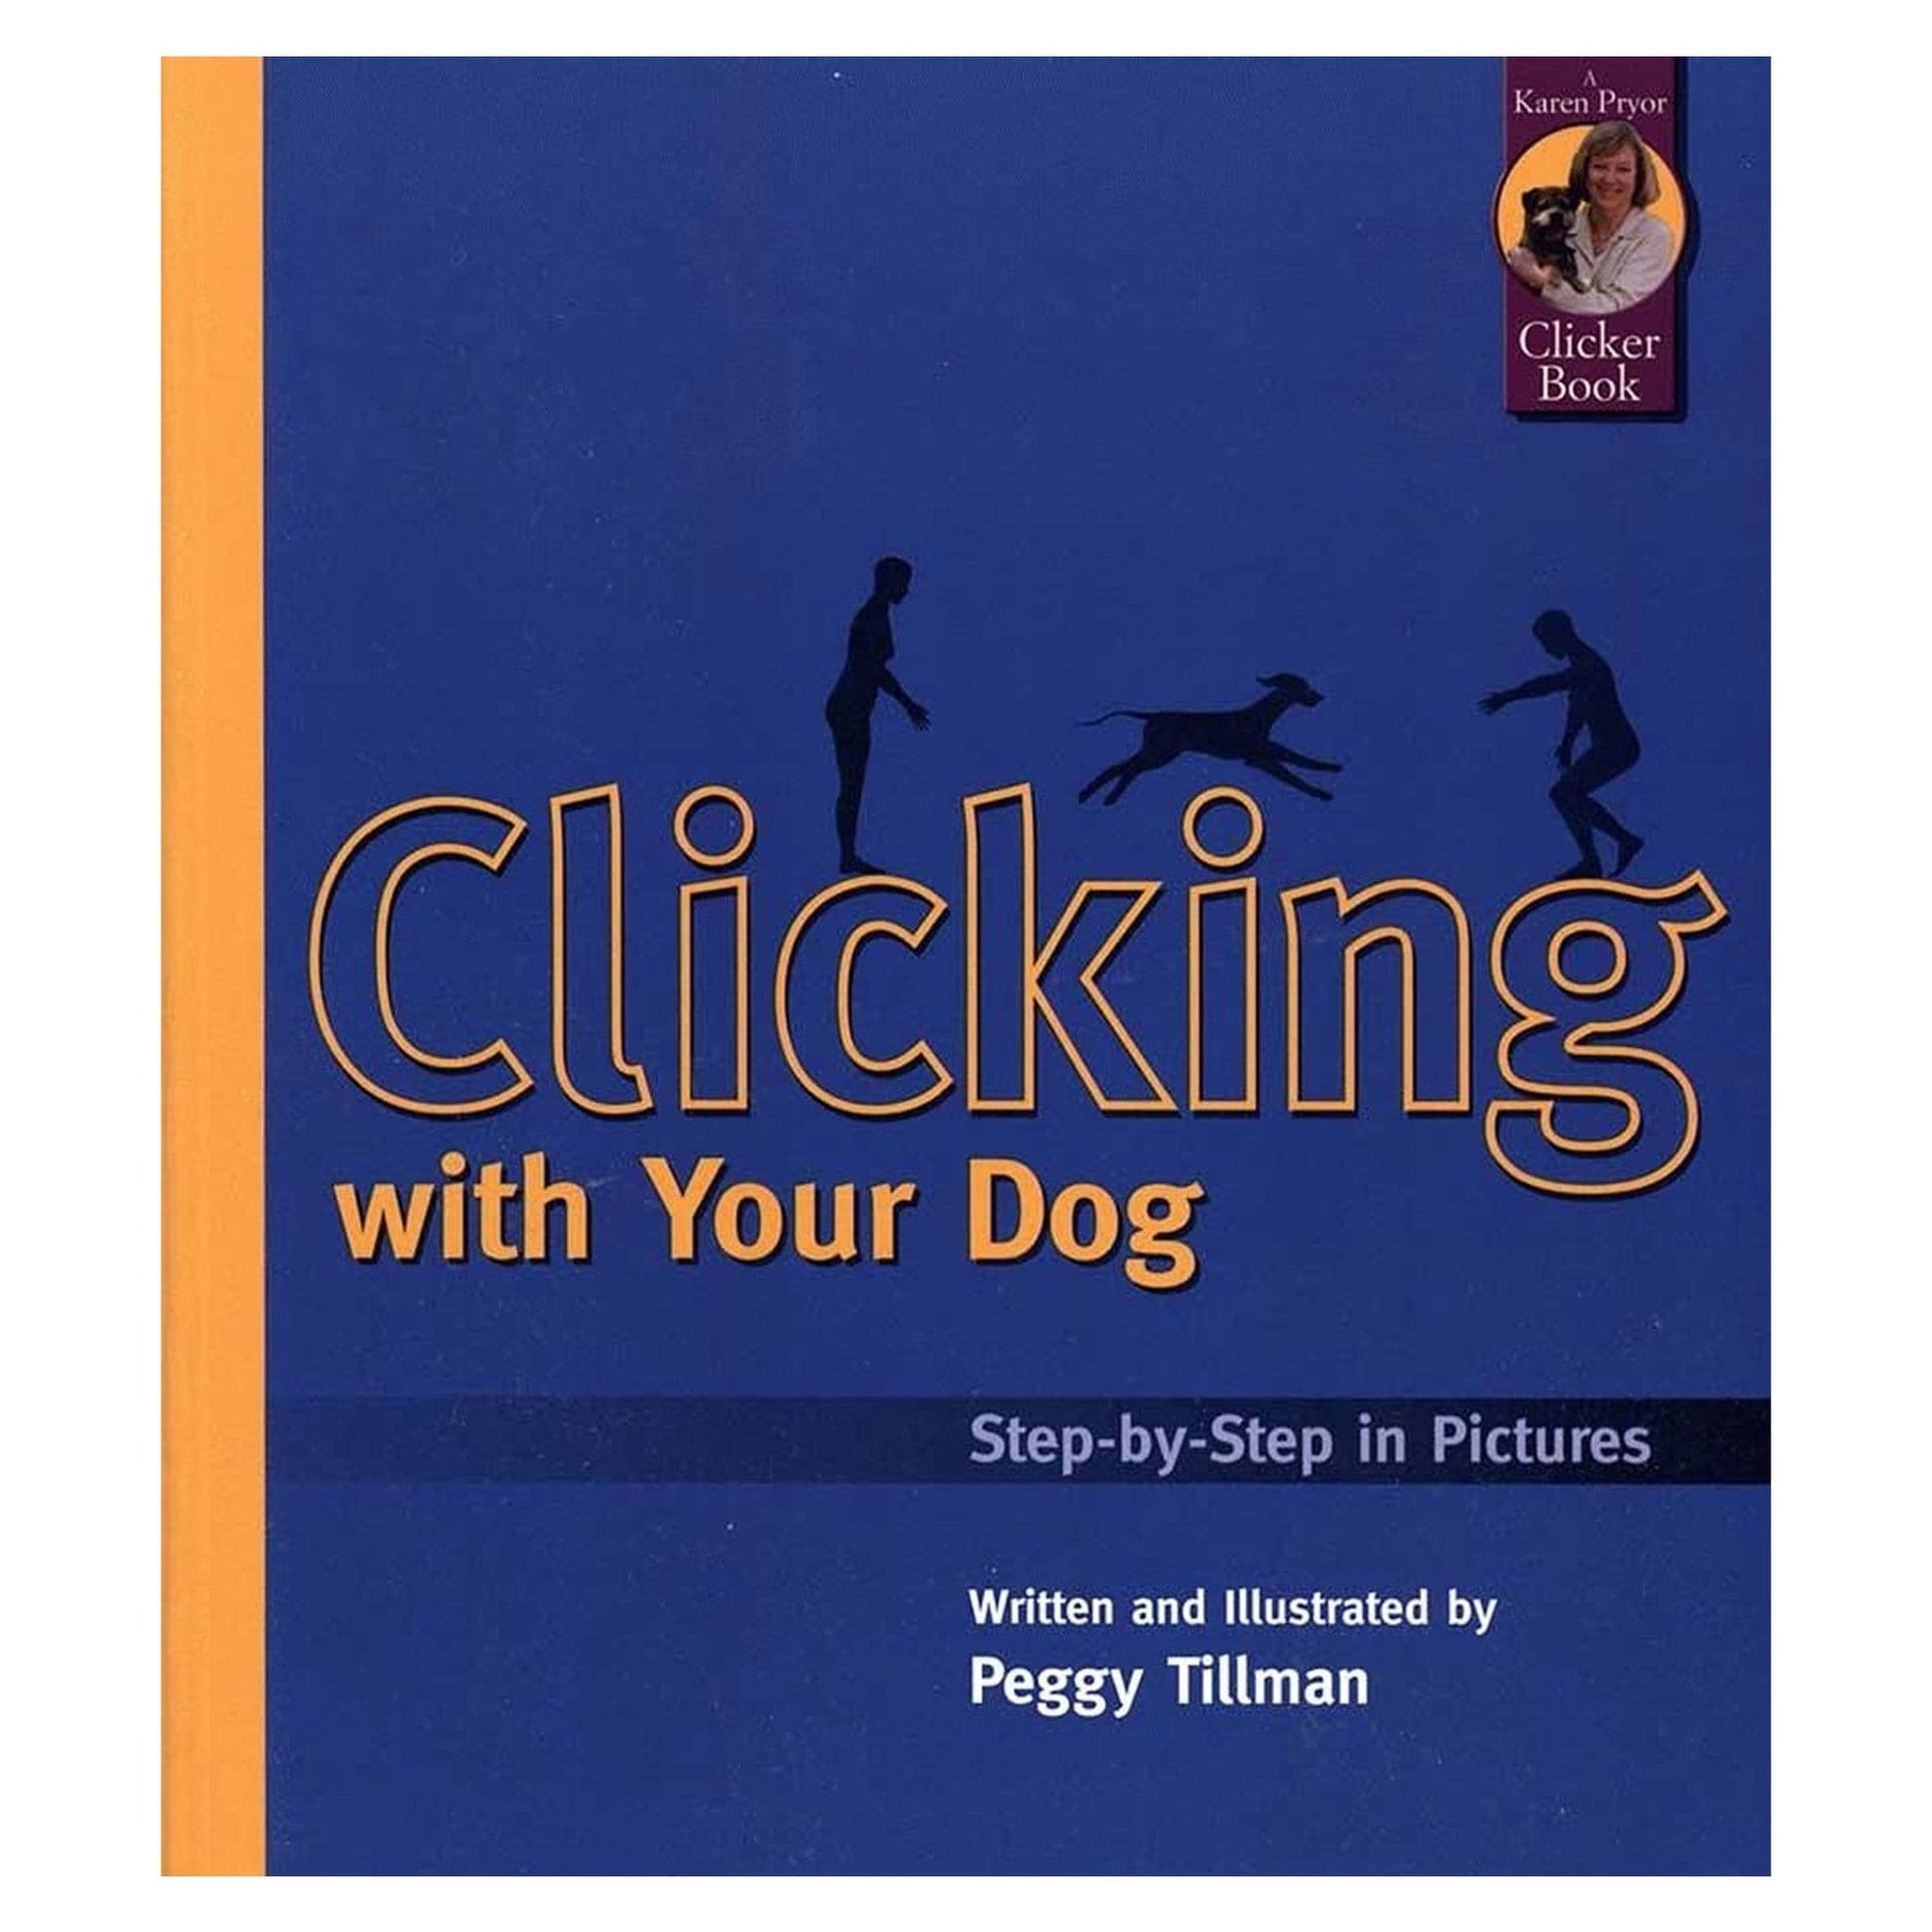 Clicking with Your Dog by Peggy Tillman